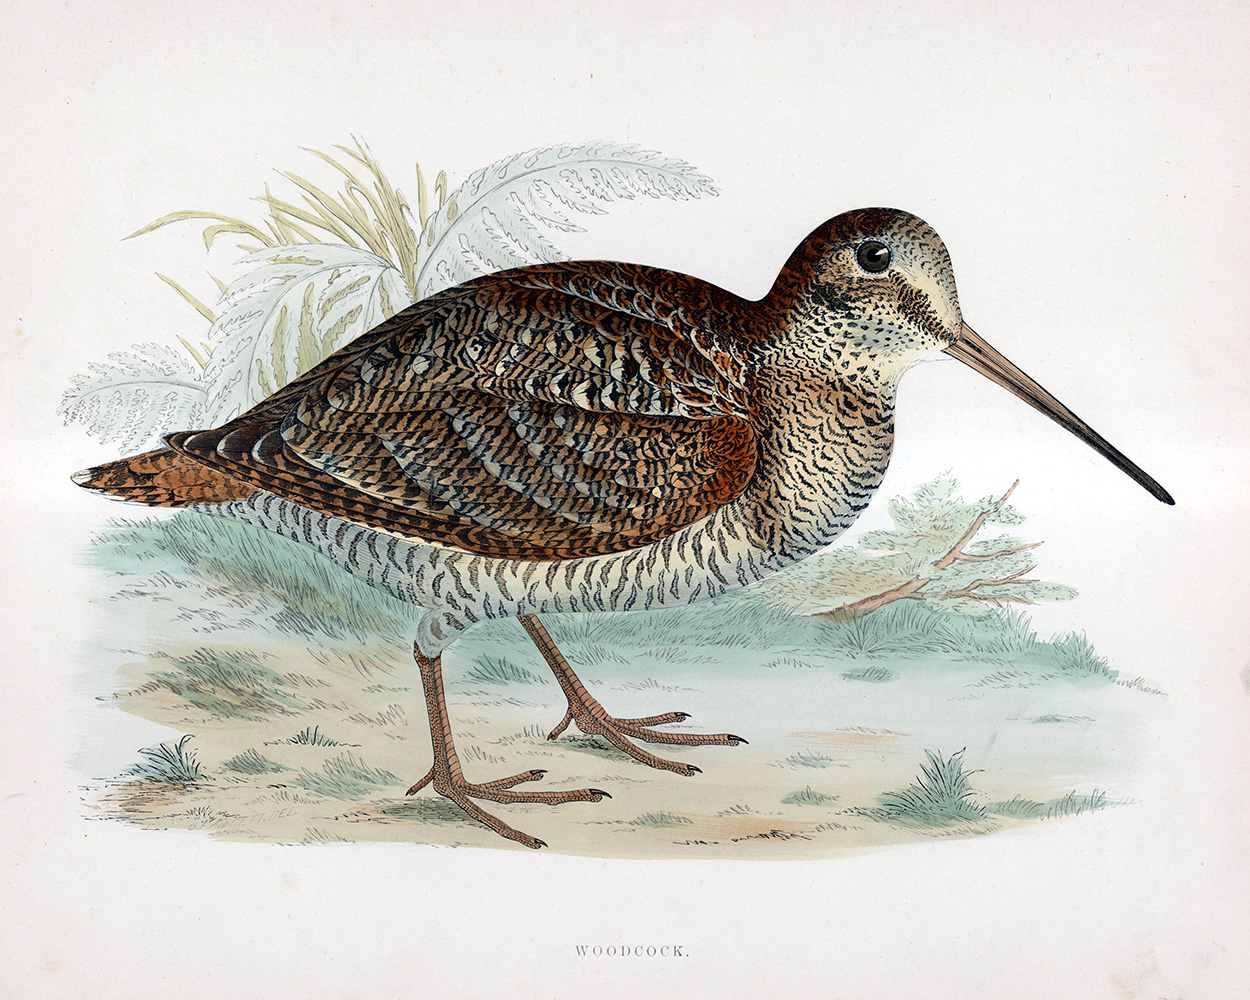 Woodcock - hand coloured lithograph 1891 (Print) art by Beverley R Morris at The Illustration Art Gallery